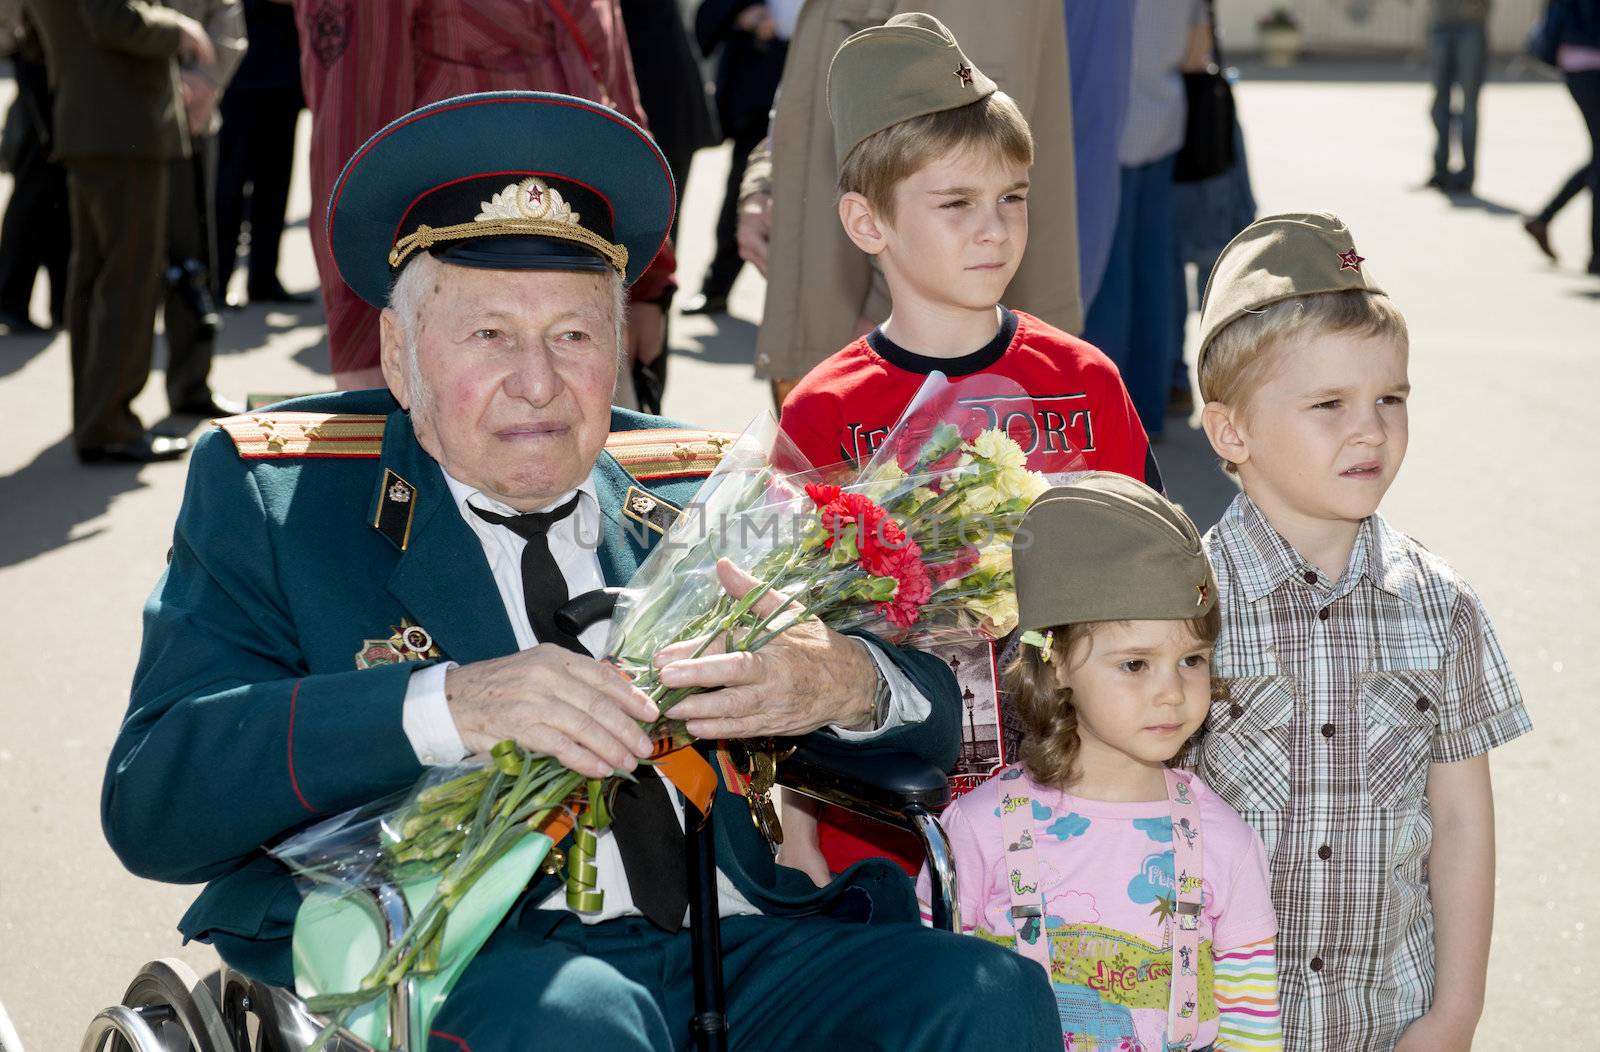  Moscow, Russia - May 9, 2013: Old man veteran of WWII in uniform decorated with numerous orders and medals bearing bunch of flowers and three children during festivities devoted to 68th anniversary of Victory Day.